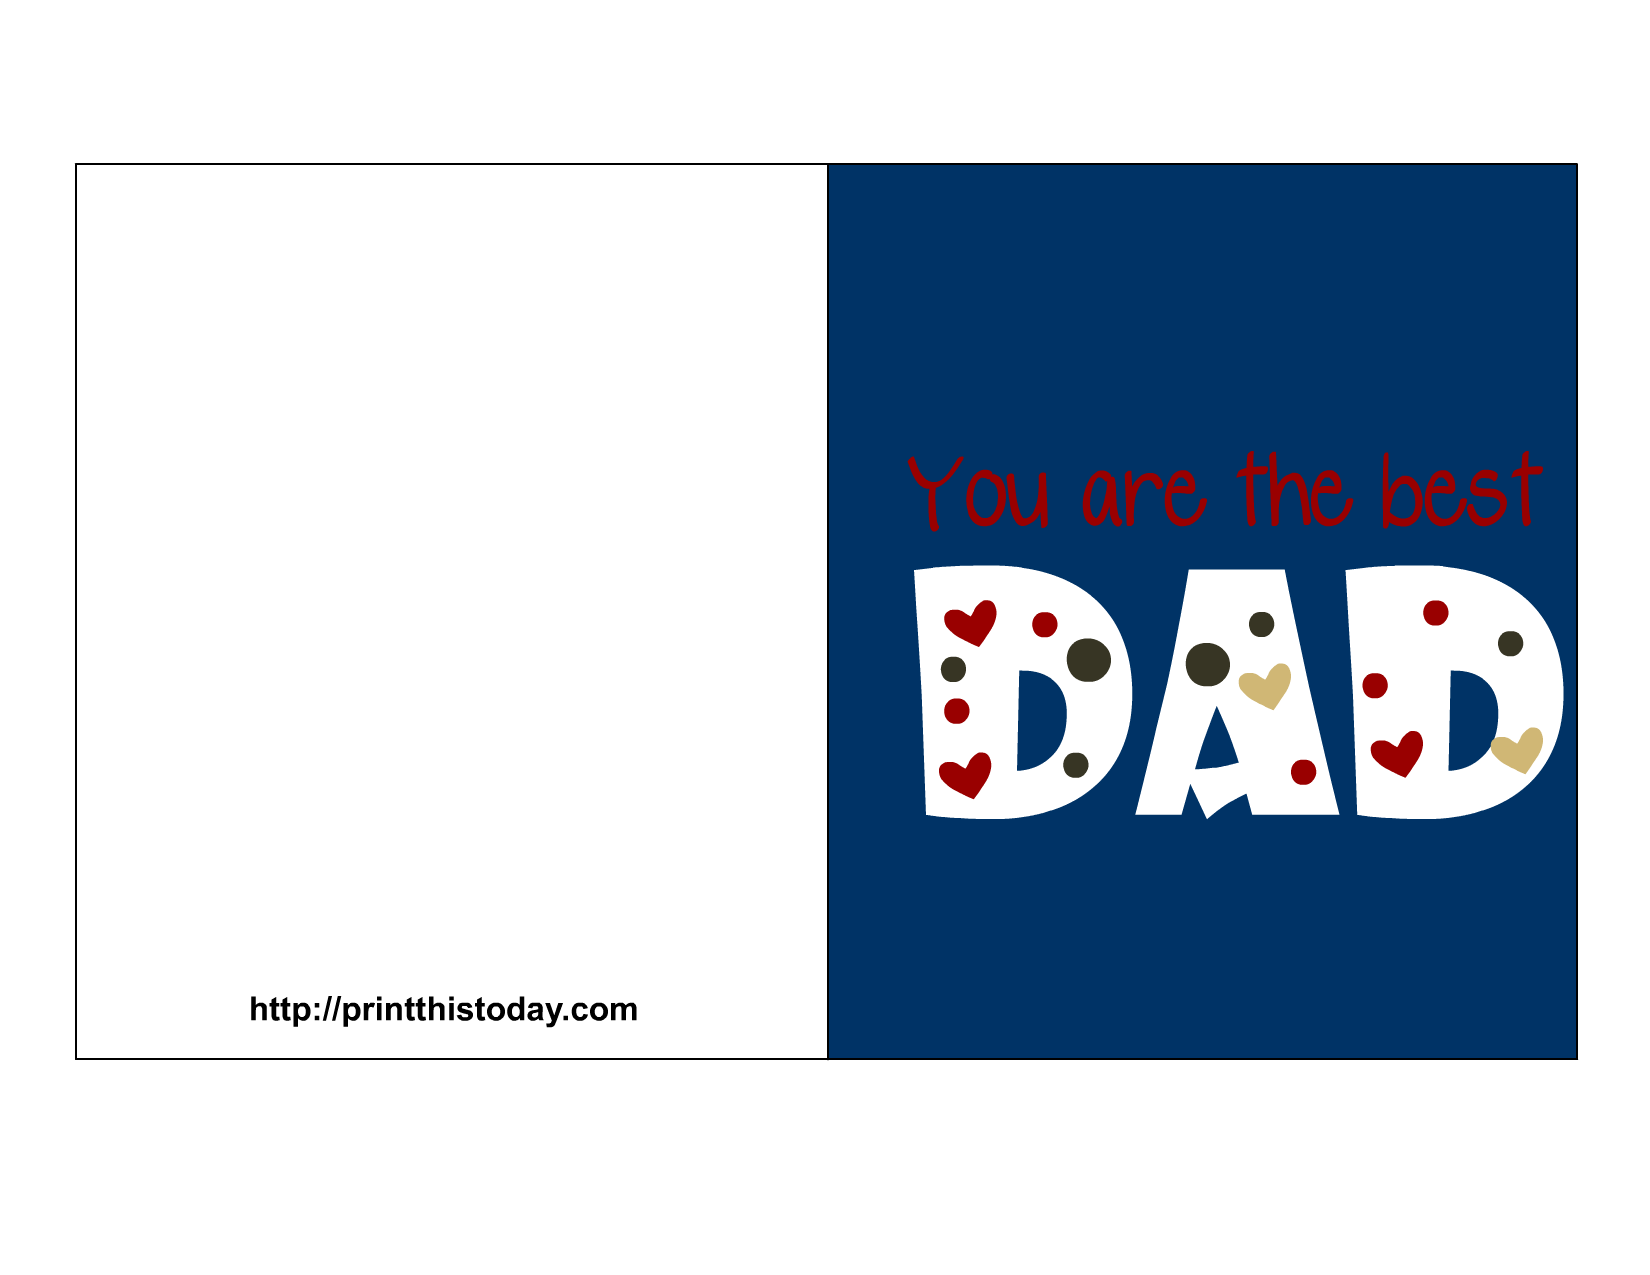 free-fathers-day-printable-cards